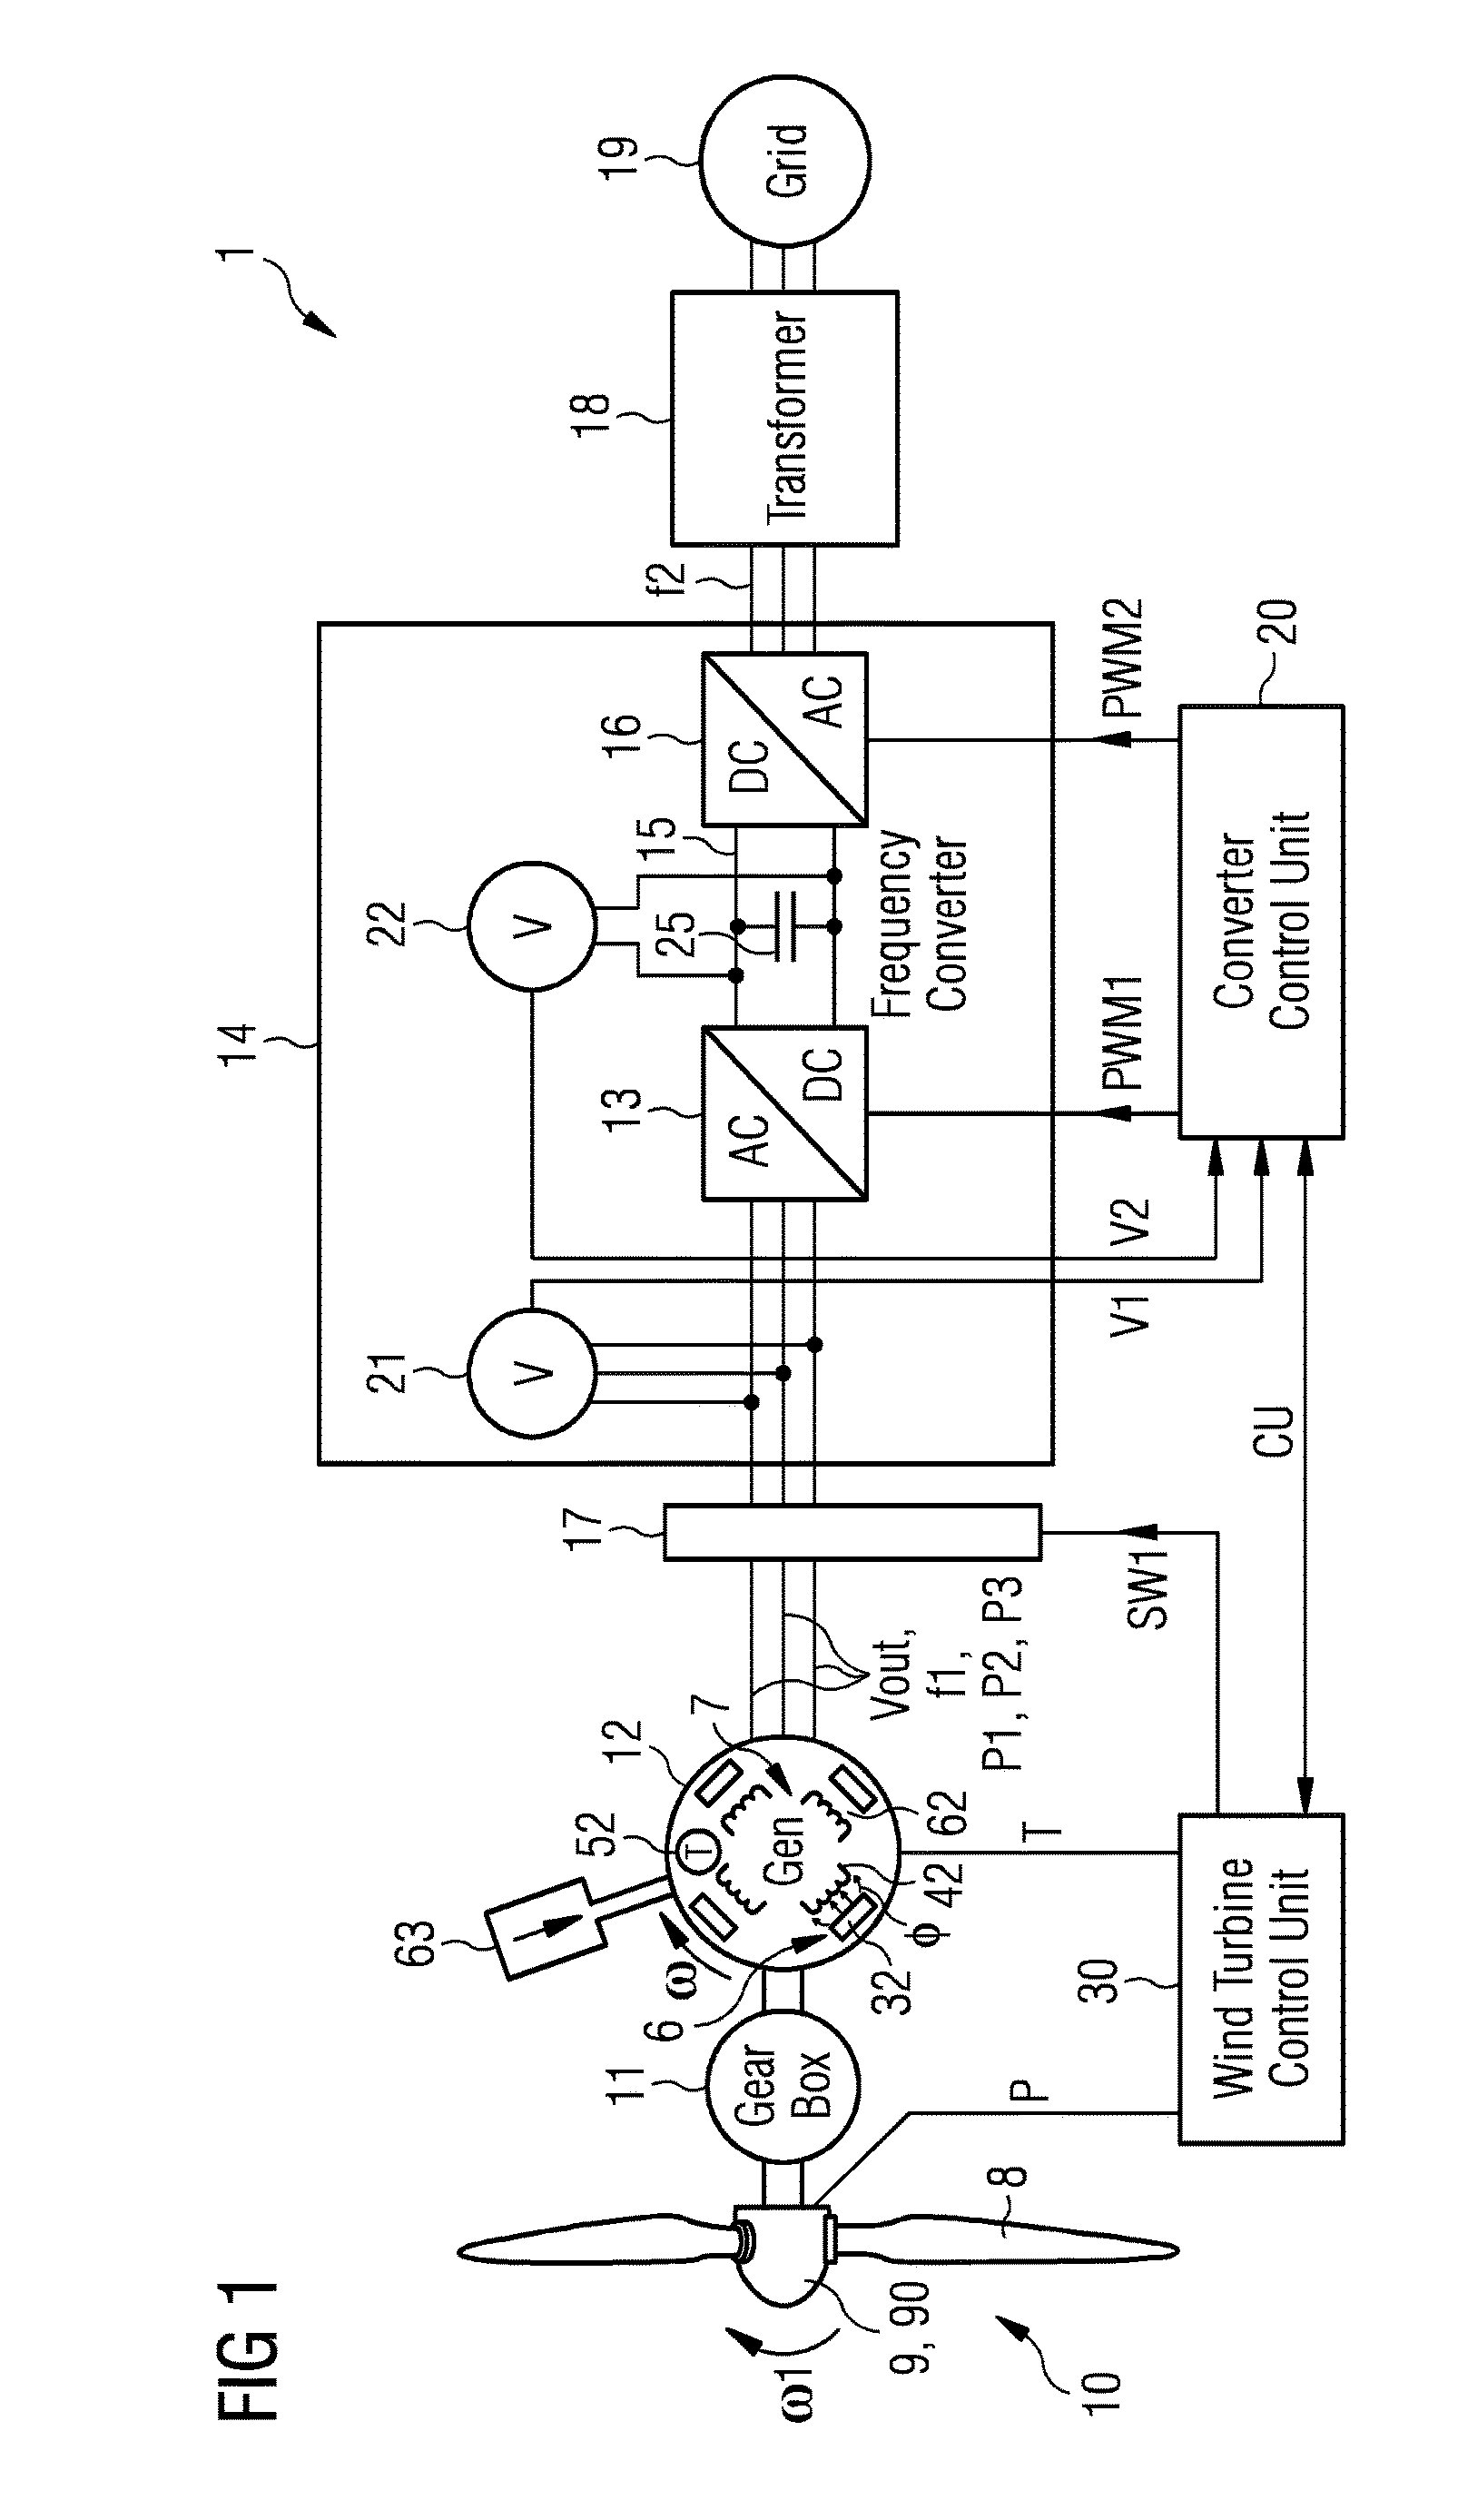 Method to detect or monitor the demagnetization of a magnet